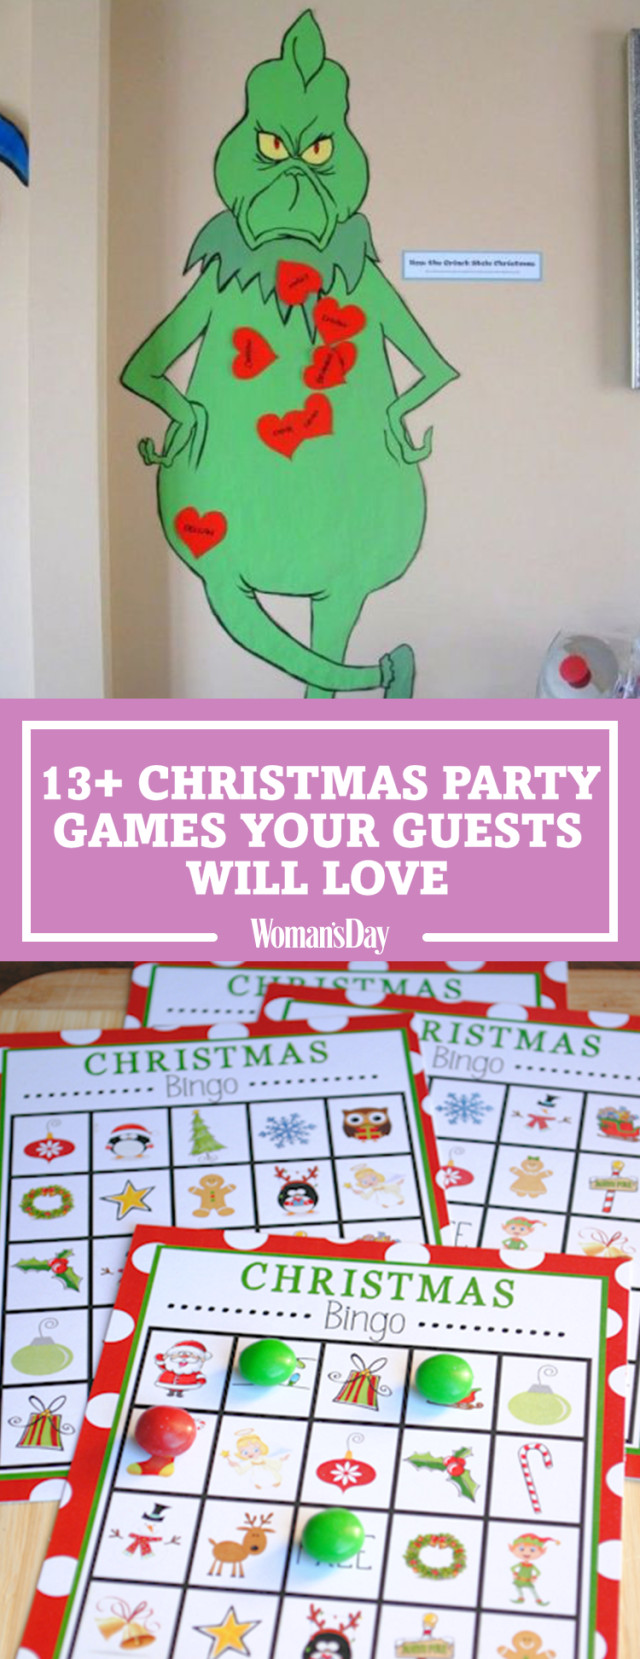 Holiday Party Activity Ideas
 The ly Christmas Games You ll Need for Your Next Holiday